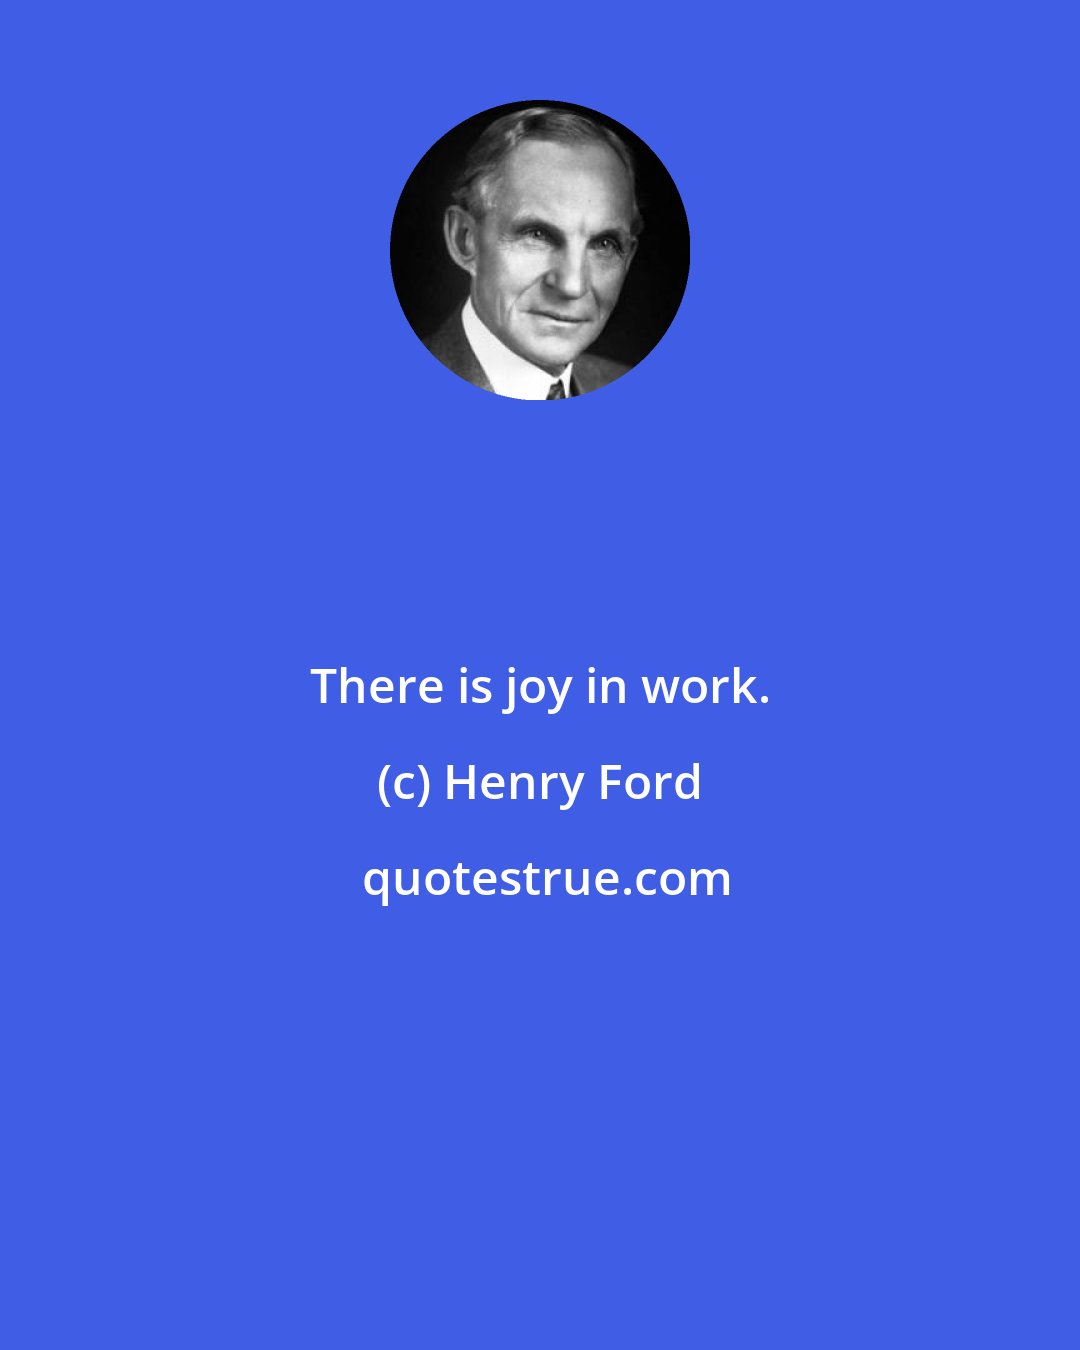 Henry Ford: There is joy in work.